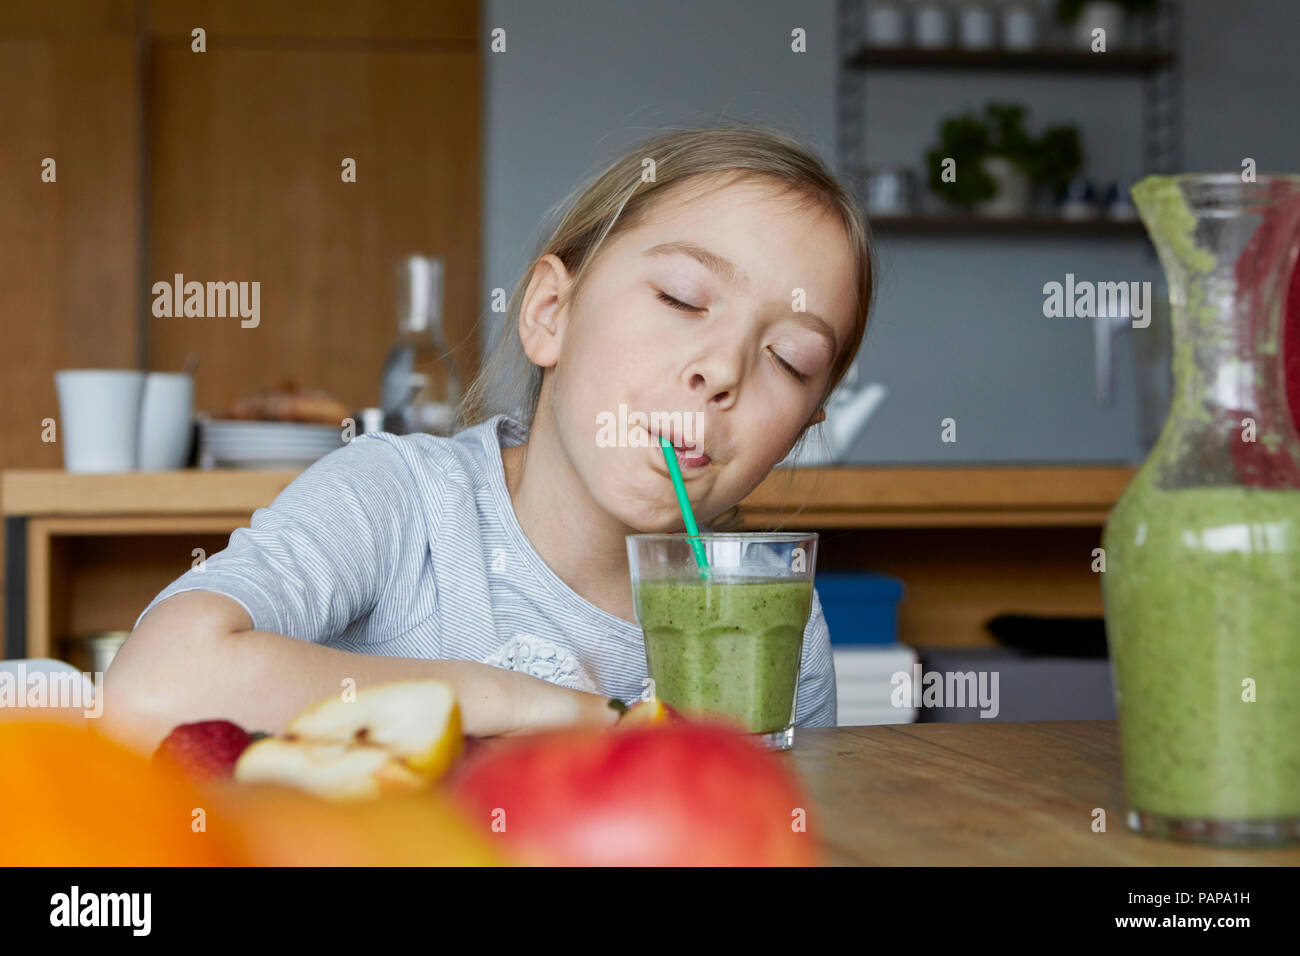 Girl sitting in kitchen, drinking homemade fruit smoothie Stock Photo